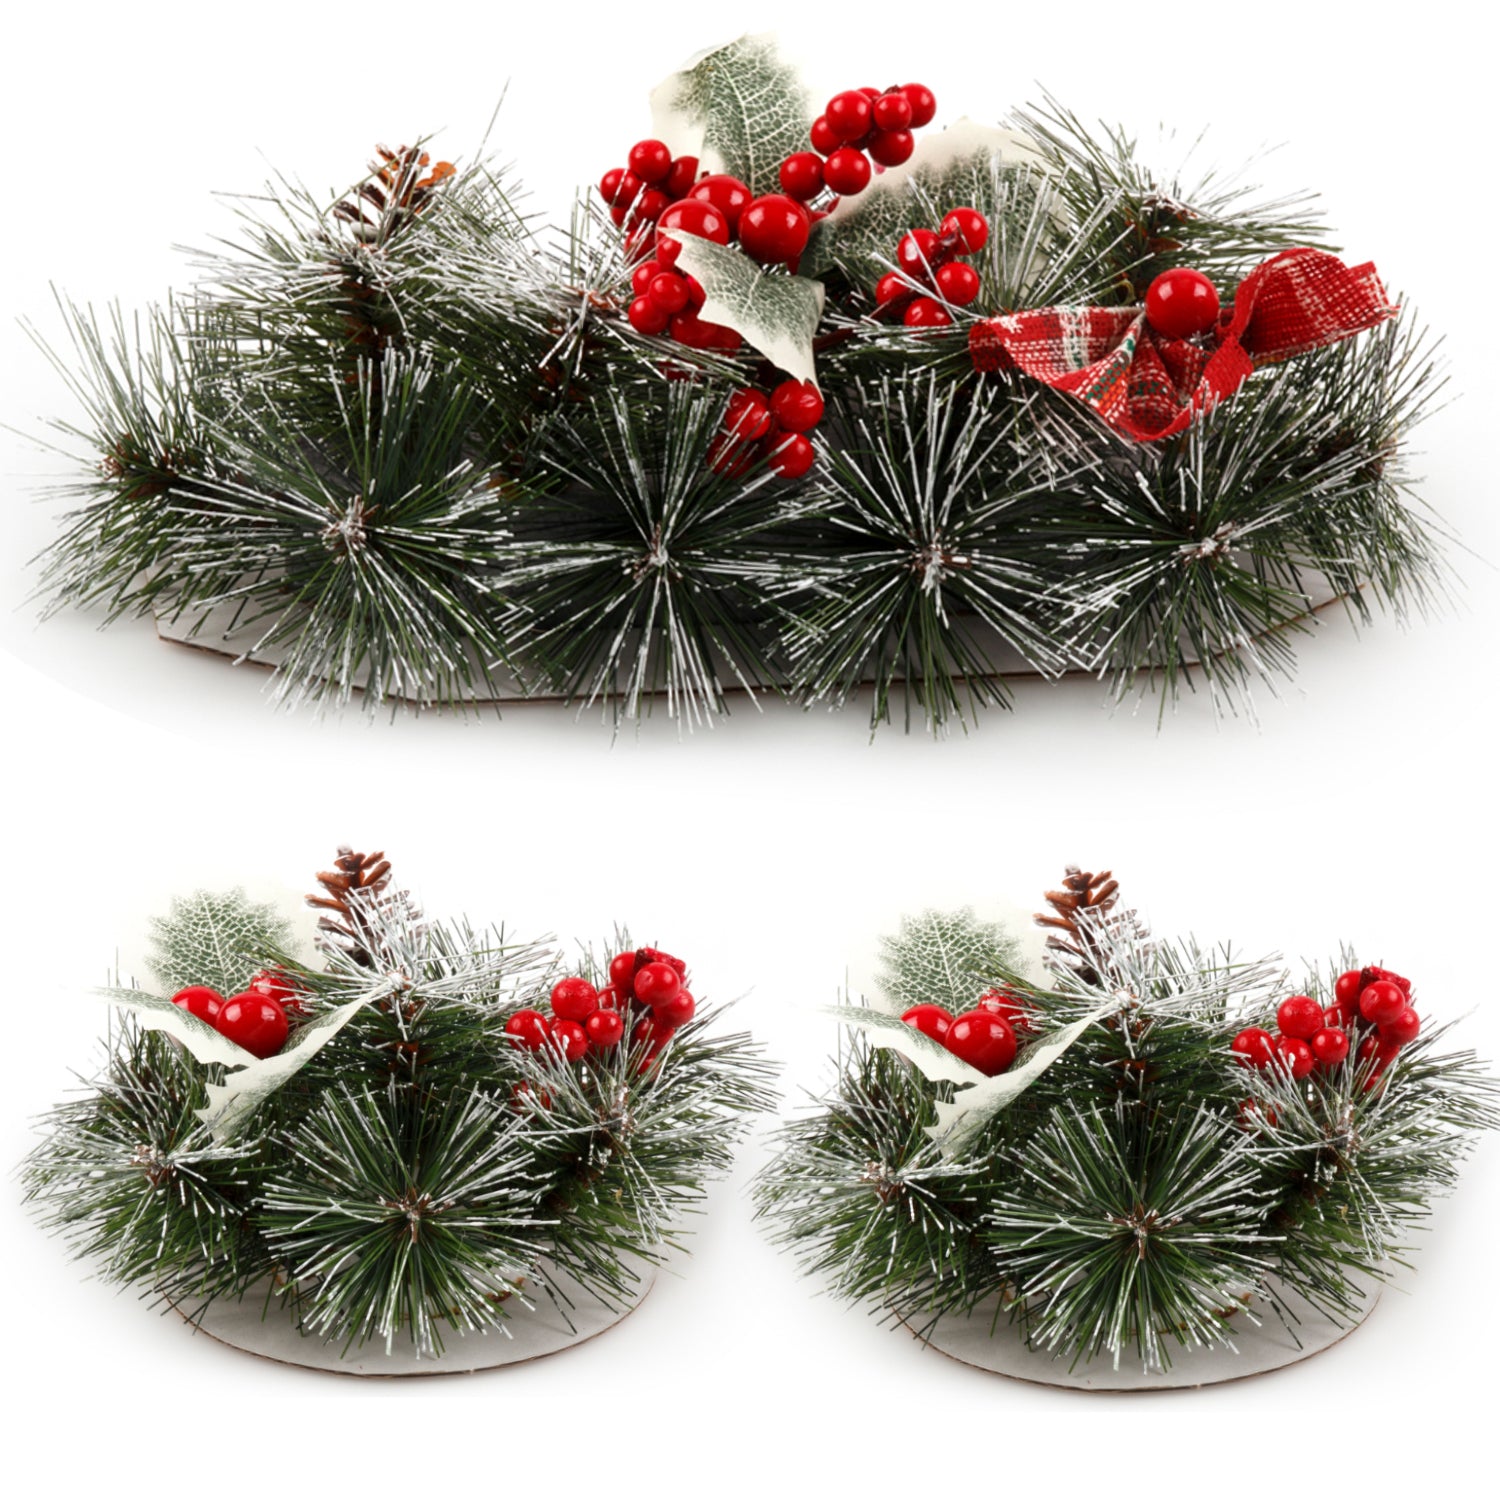 Christmas Floral Table Arrangements Red Berries Pine Cones Flowers Decorations, Small (Set of 2)